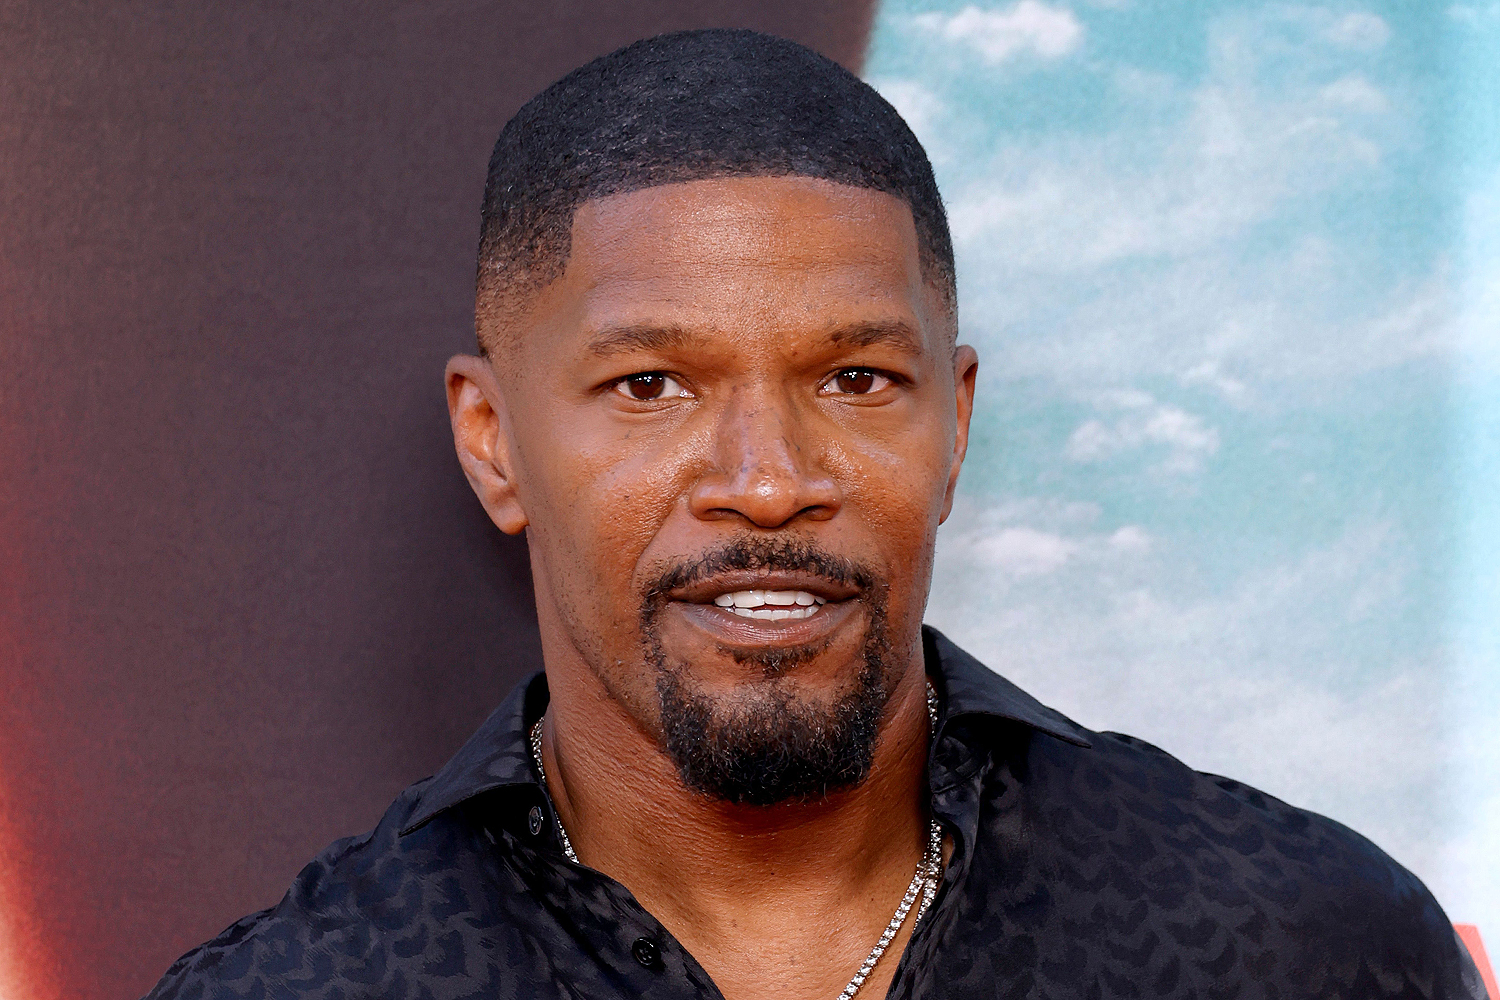 Jamie Foxx attends the world premiere of Netflix's "Day Shift" at Regal LA Live on August 10, 2022 in Los Angeles, California.